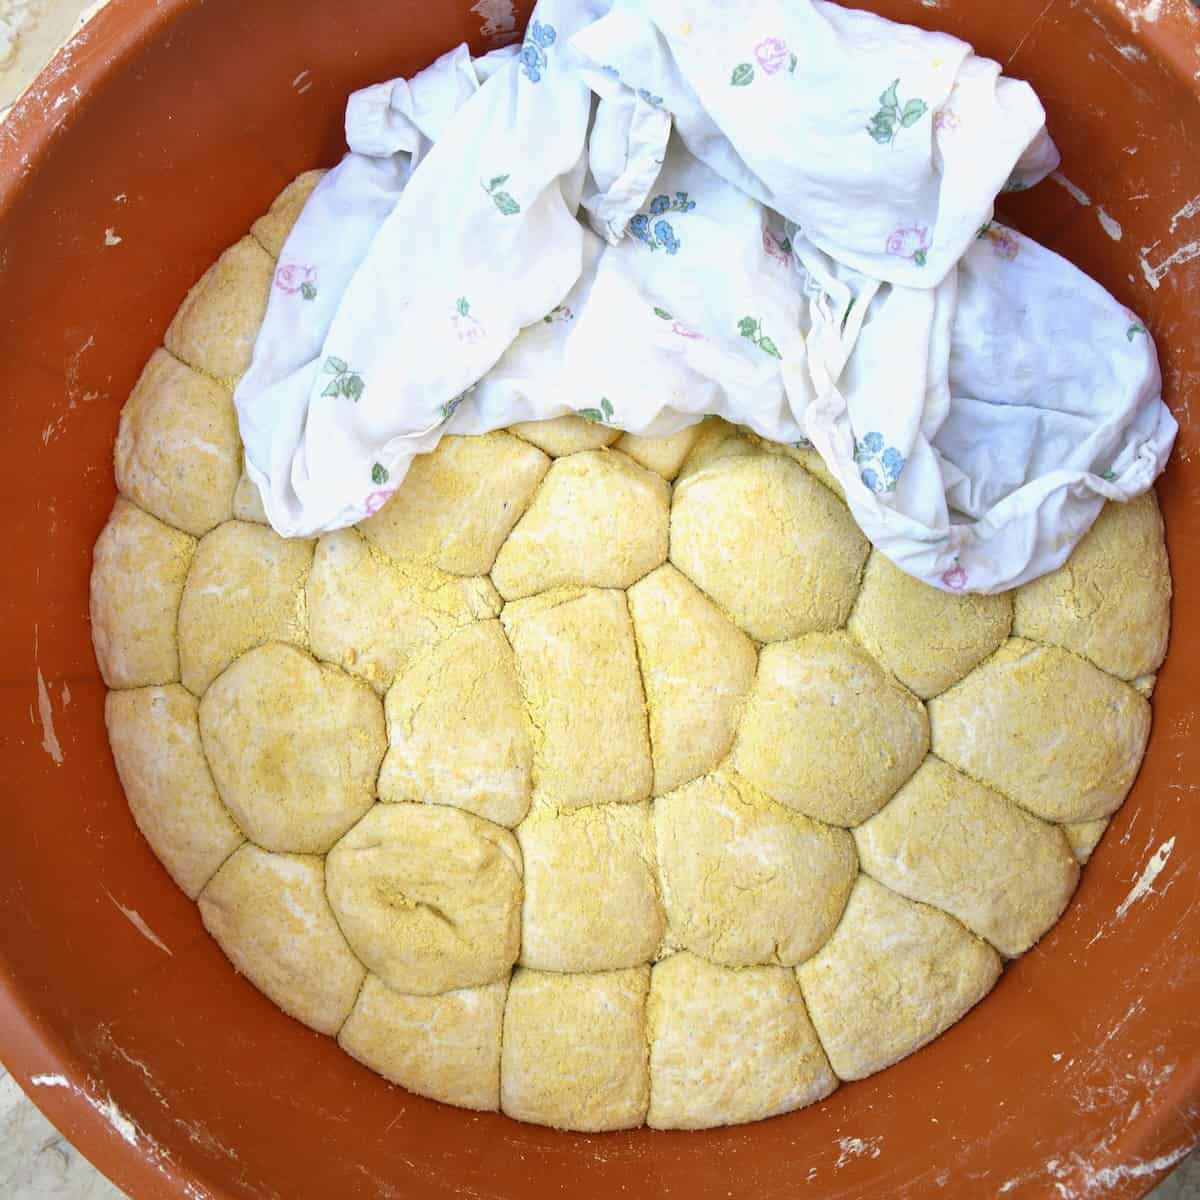 Markouk dough bread rolled into balls in a container